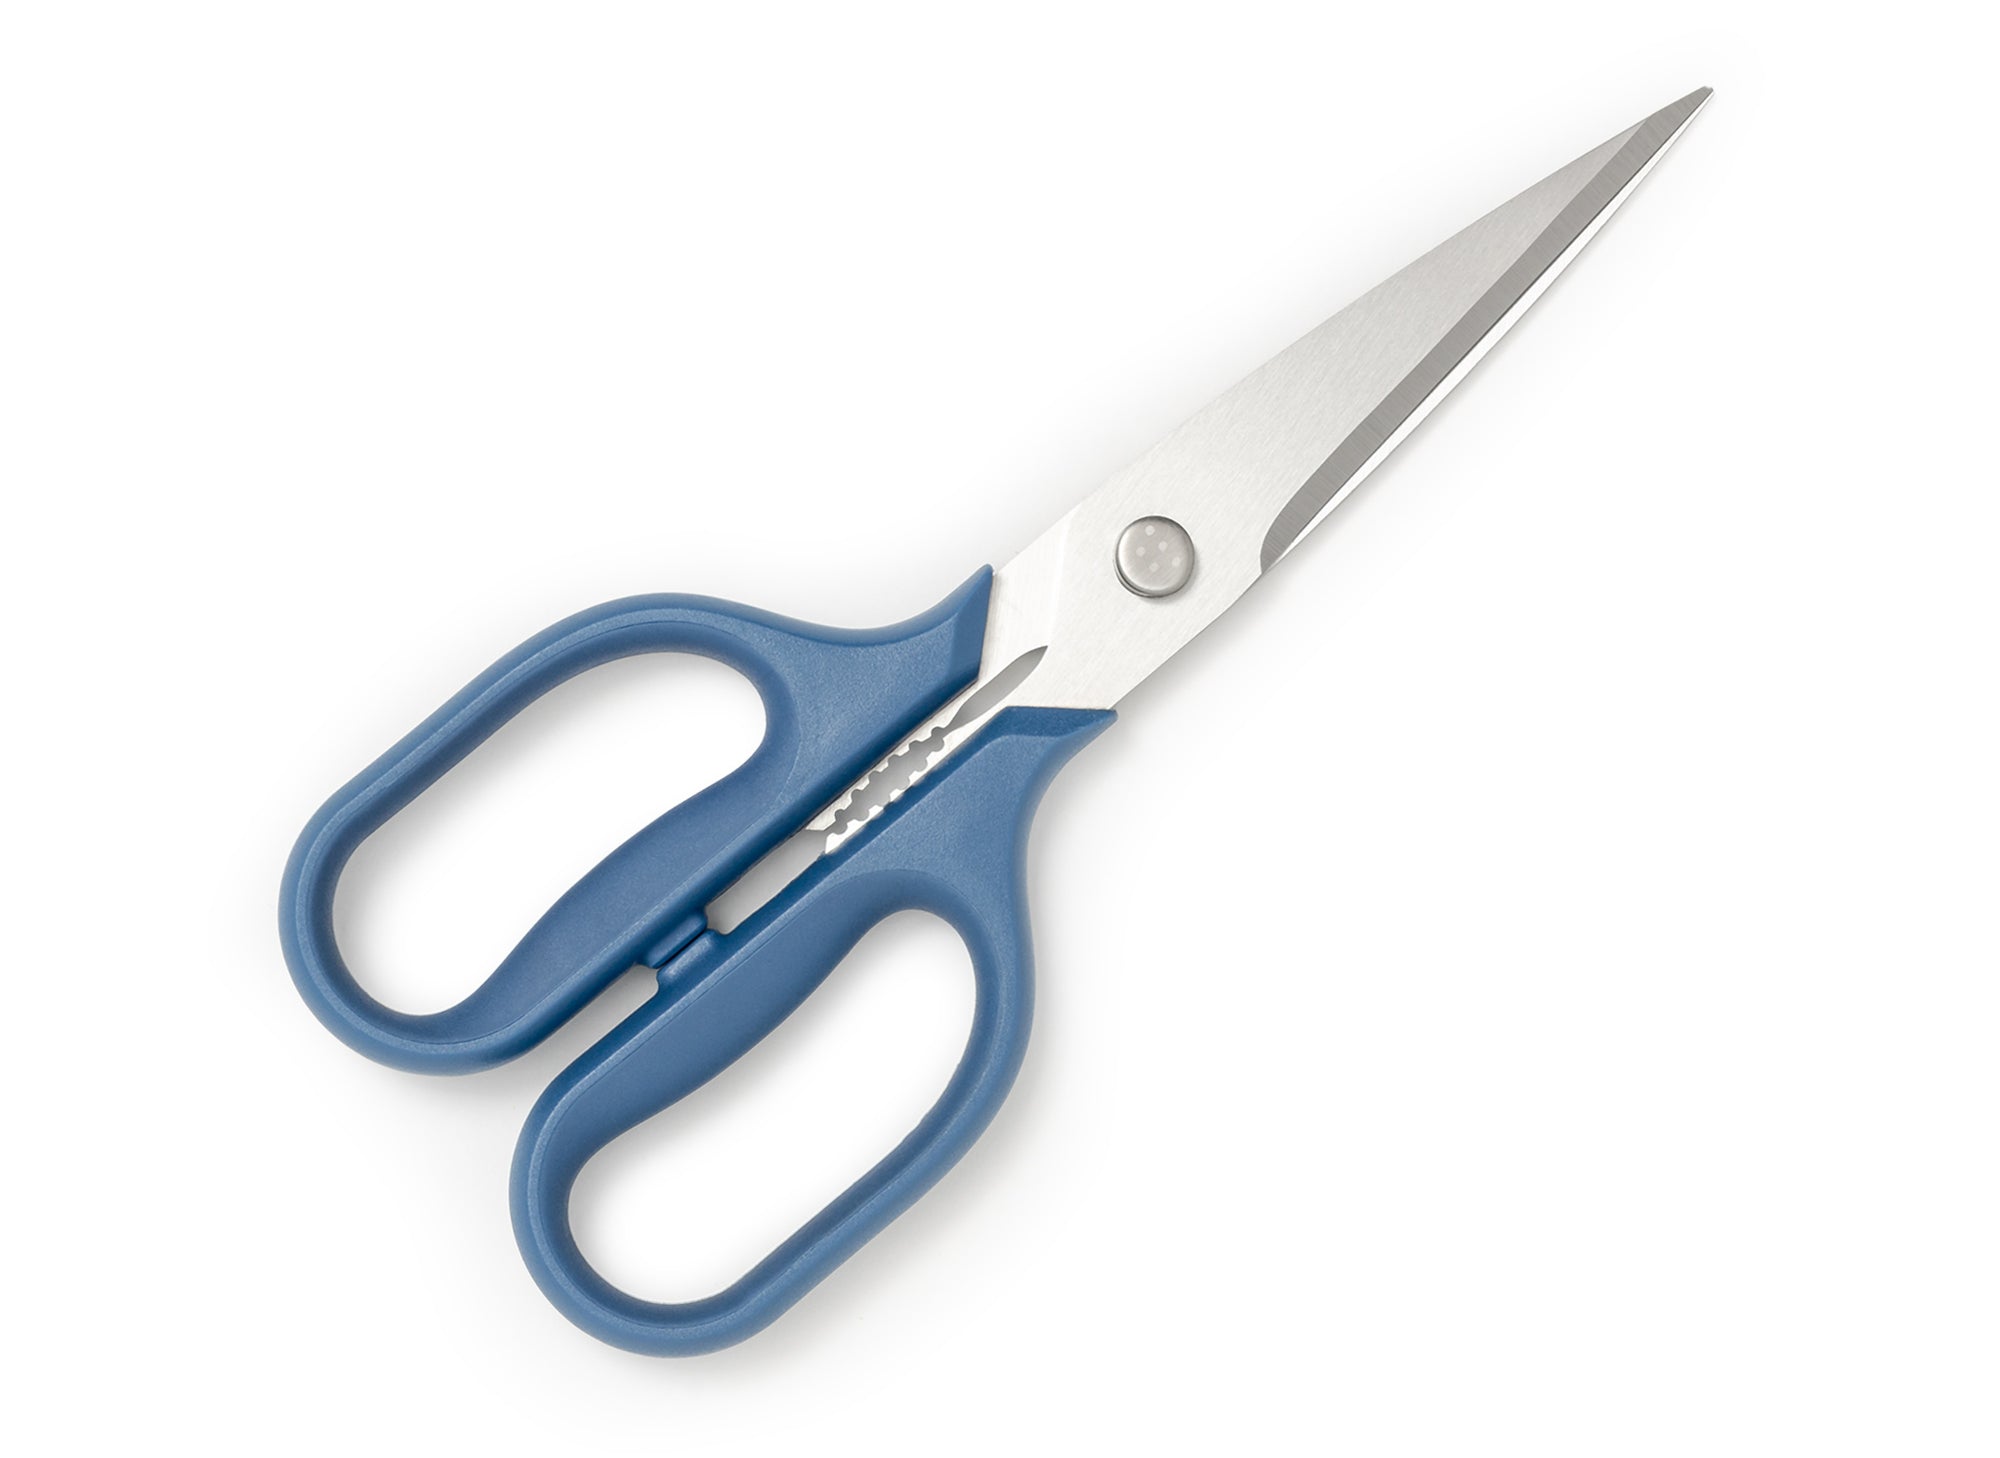 Blue Misen Kitchen Shears with blades closed.